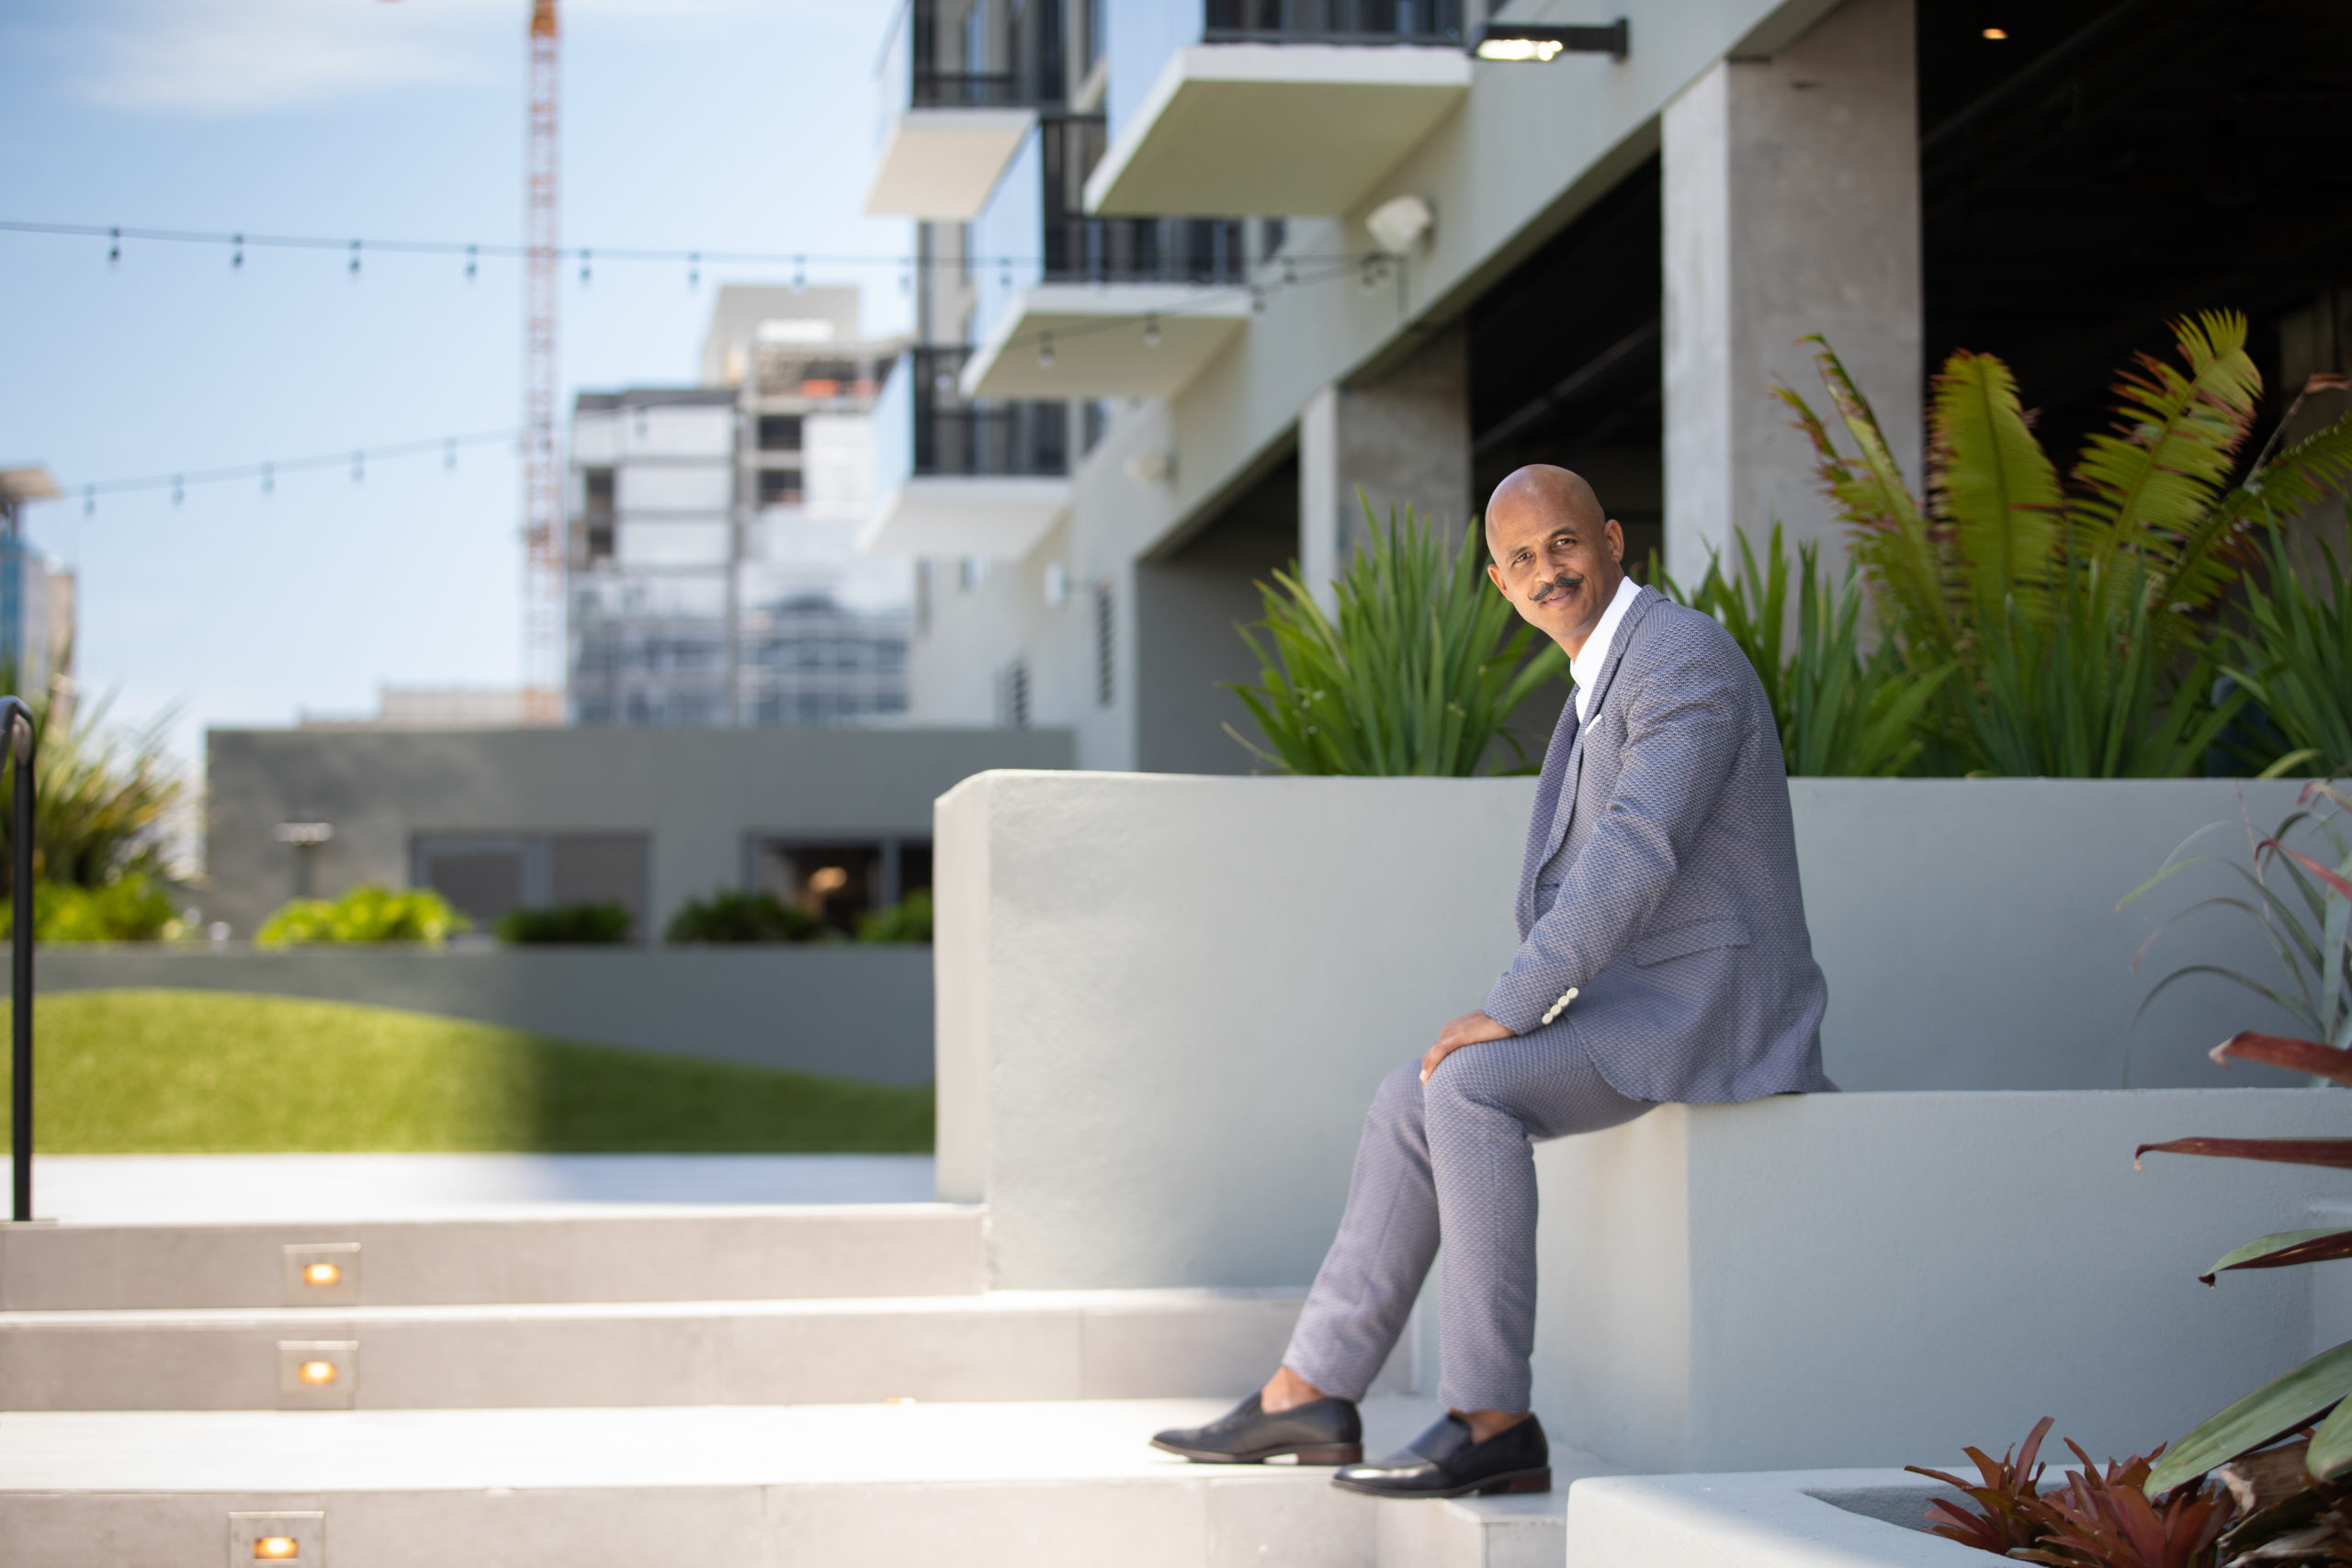 Fort Lauderdale Illustrated Men of Style Bald African American male model with moustache wearing gray suit and white shirt sitting near stairs